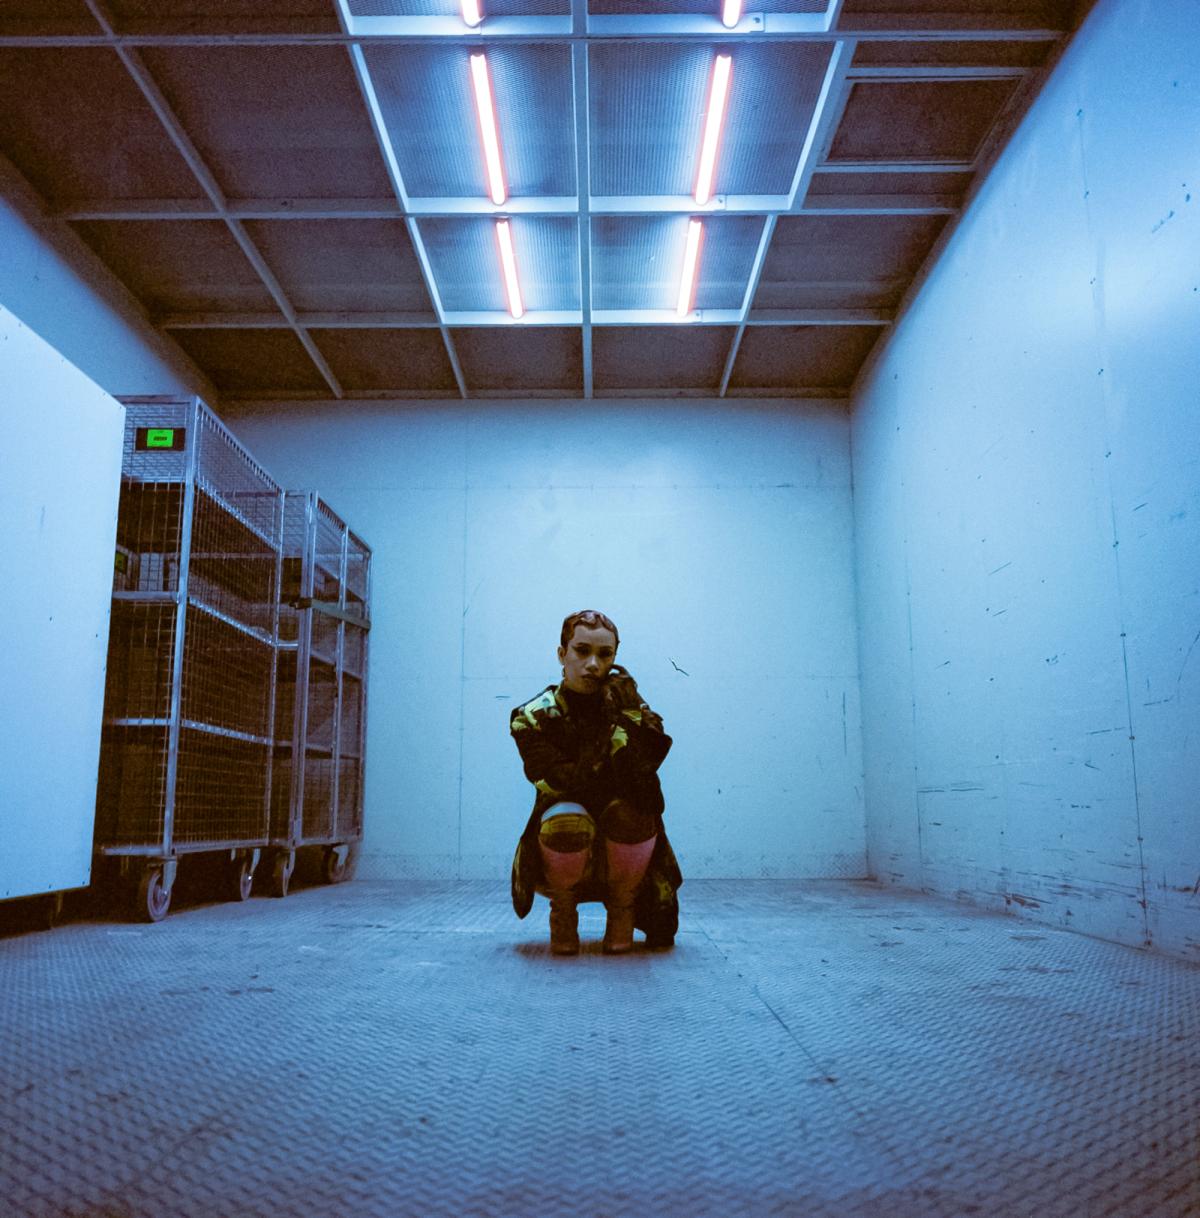 A young woman sits crouched in the middle of an industrial looking room.